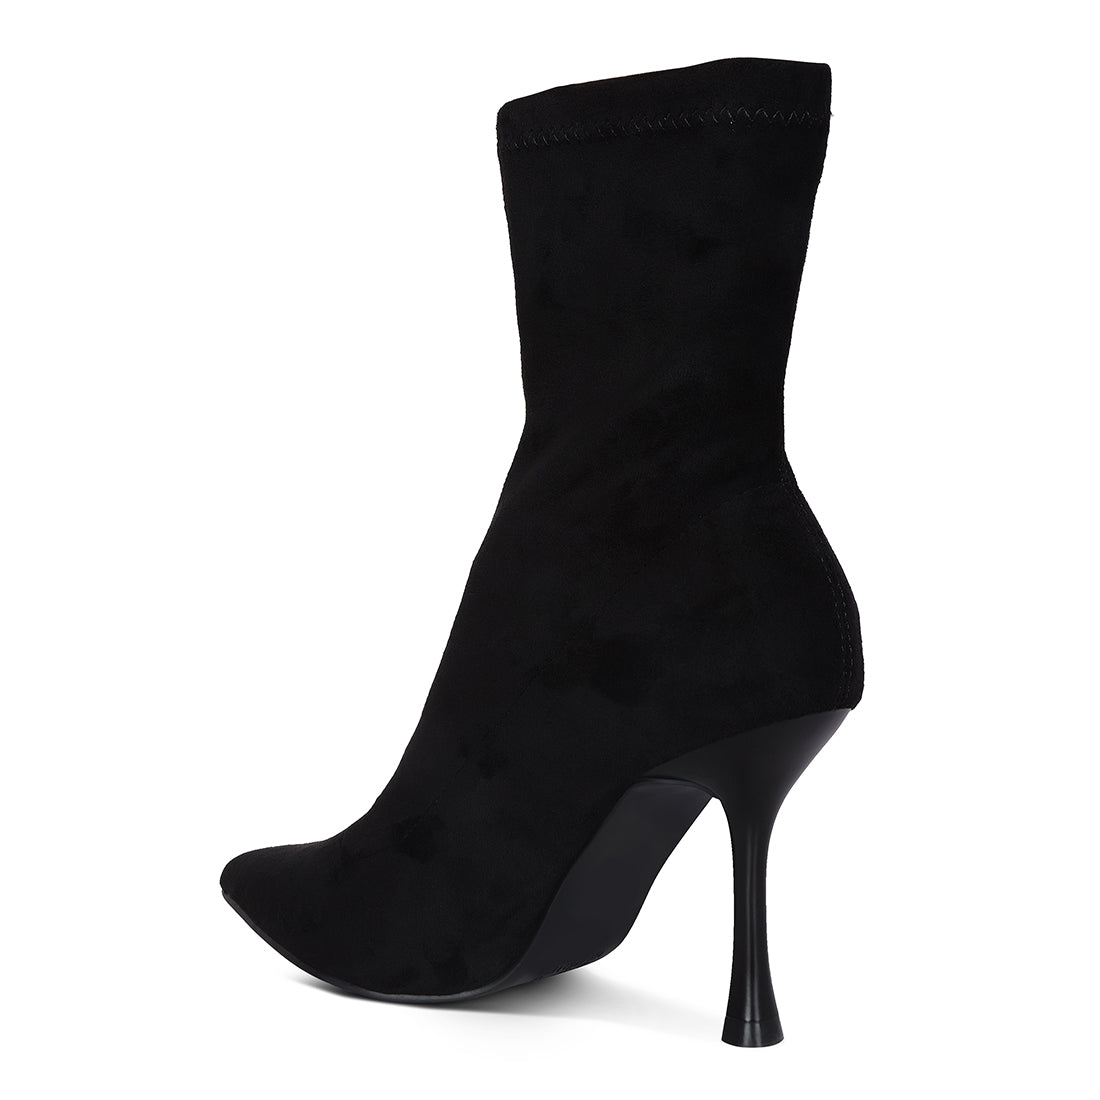 Black Tweeple Stiletto Boot With A Pointed Toe